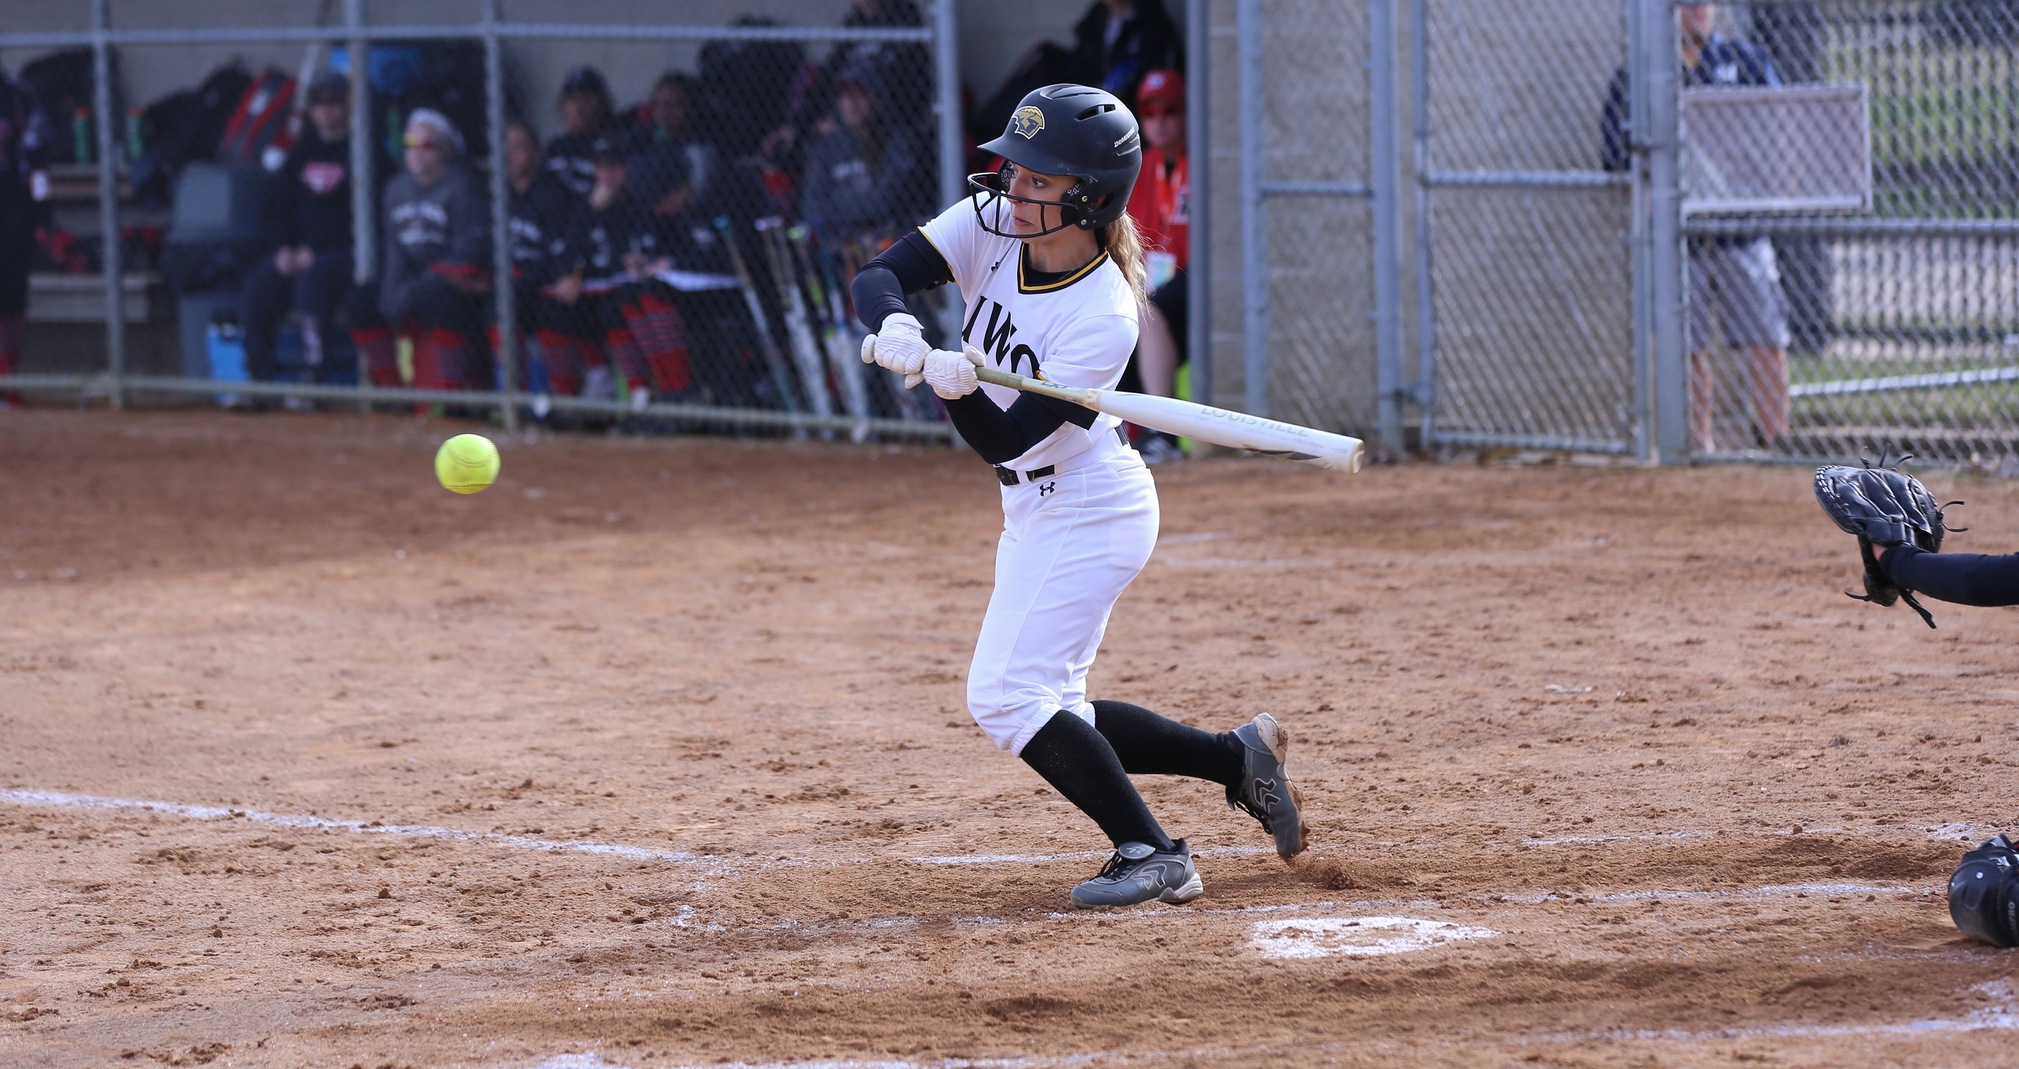 Emma Fionda went 3-for-3 with a pair of RBIs in the nightcap against the Red Hawks.